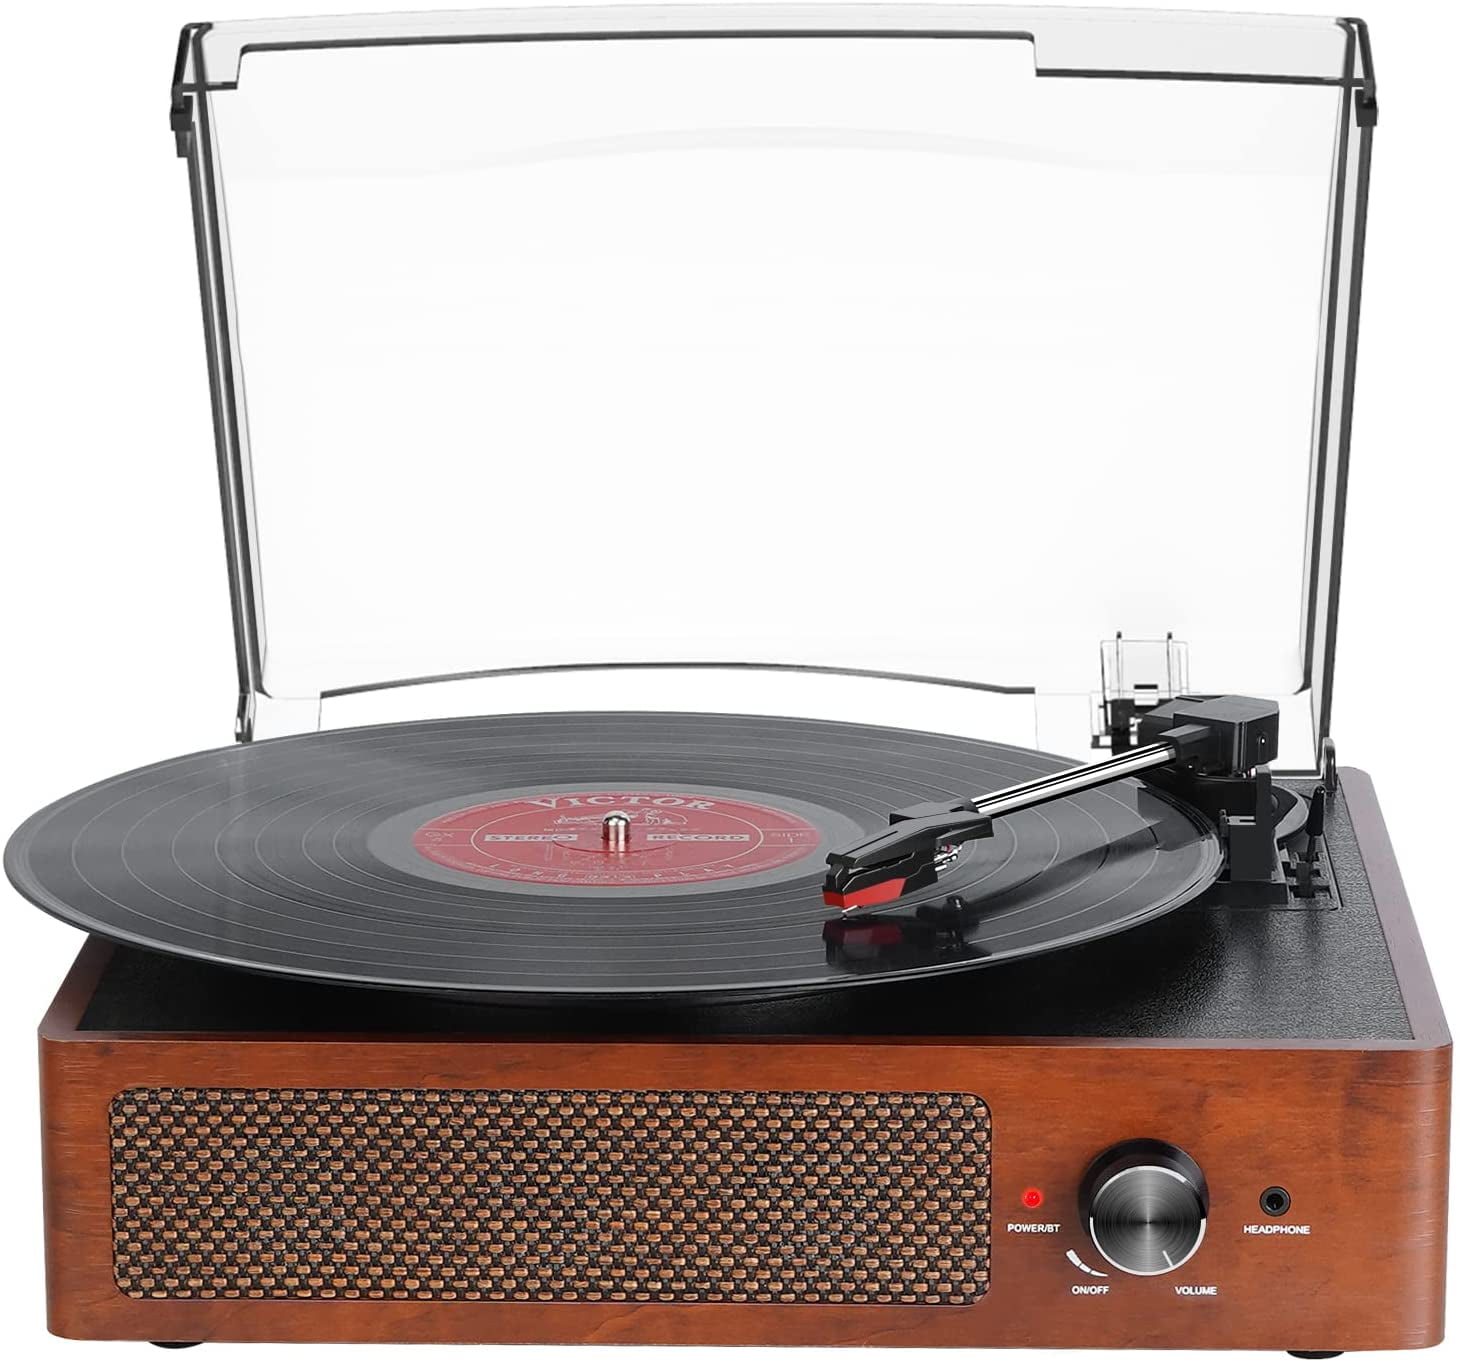 DIGITNOW!Three Speeds Turntable Retro Record Player with Built-in Stereo Speaker 